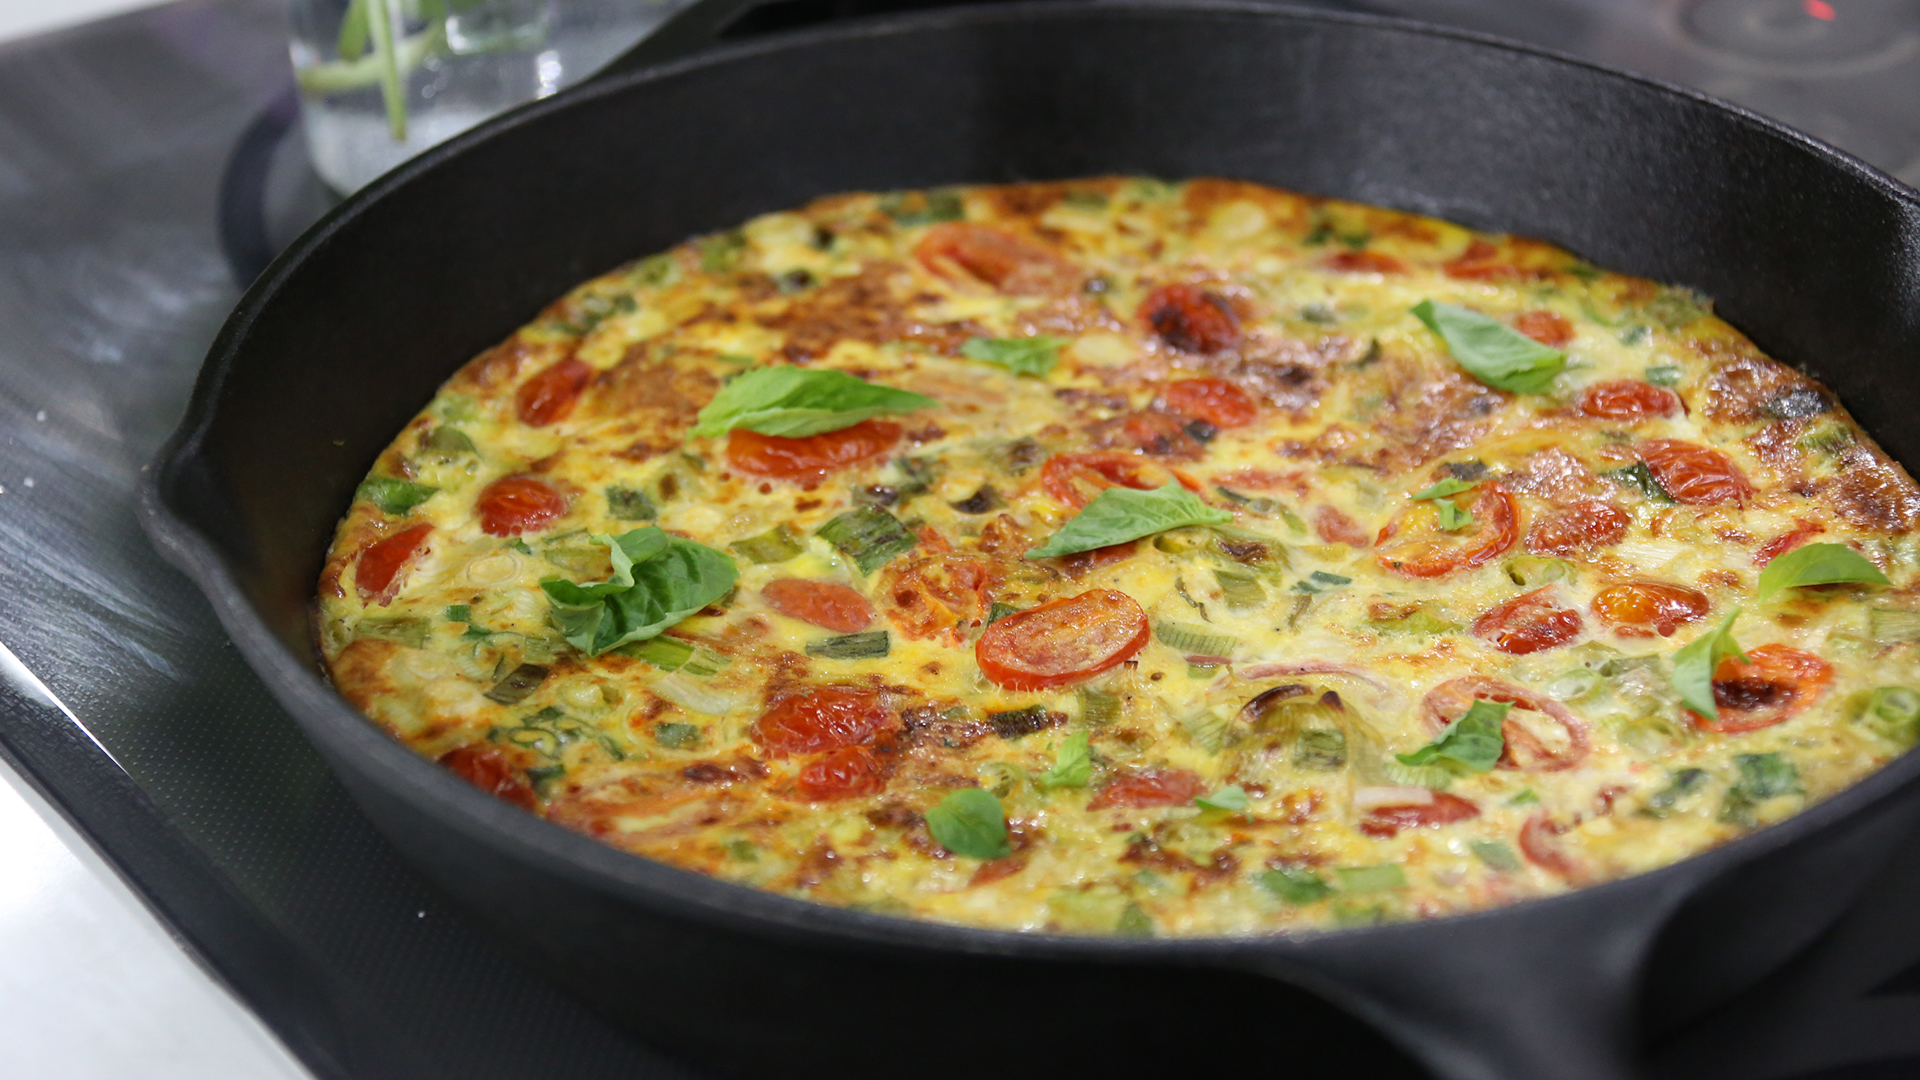 Summer frittata with tomato, basil, leeks and green onions